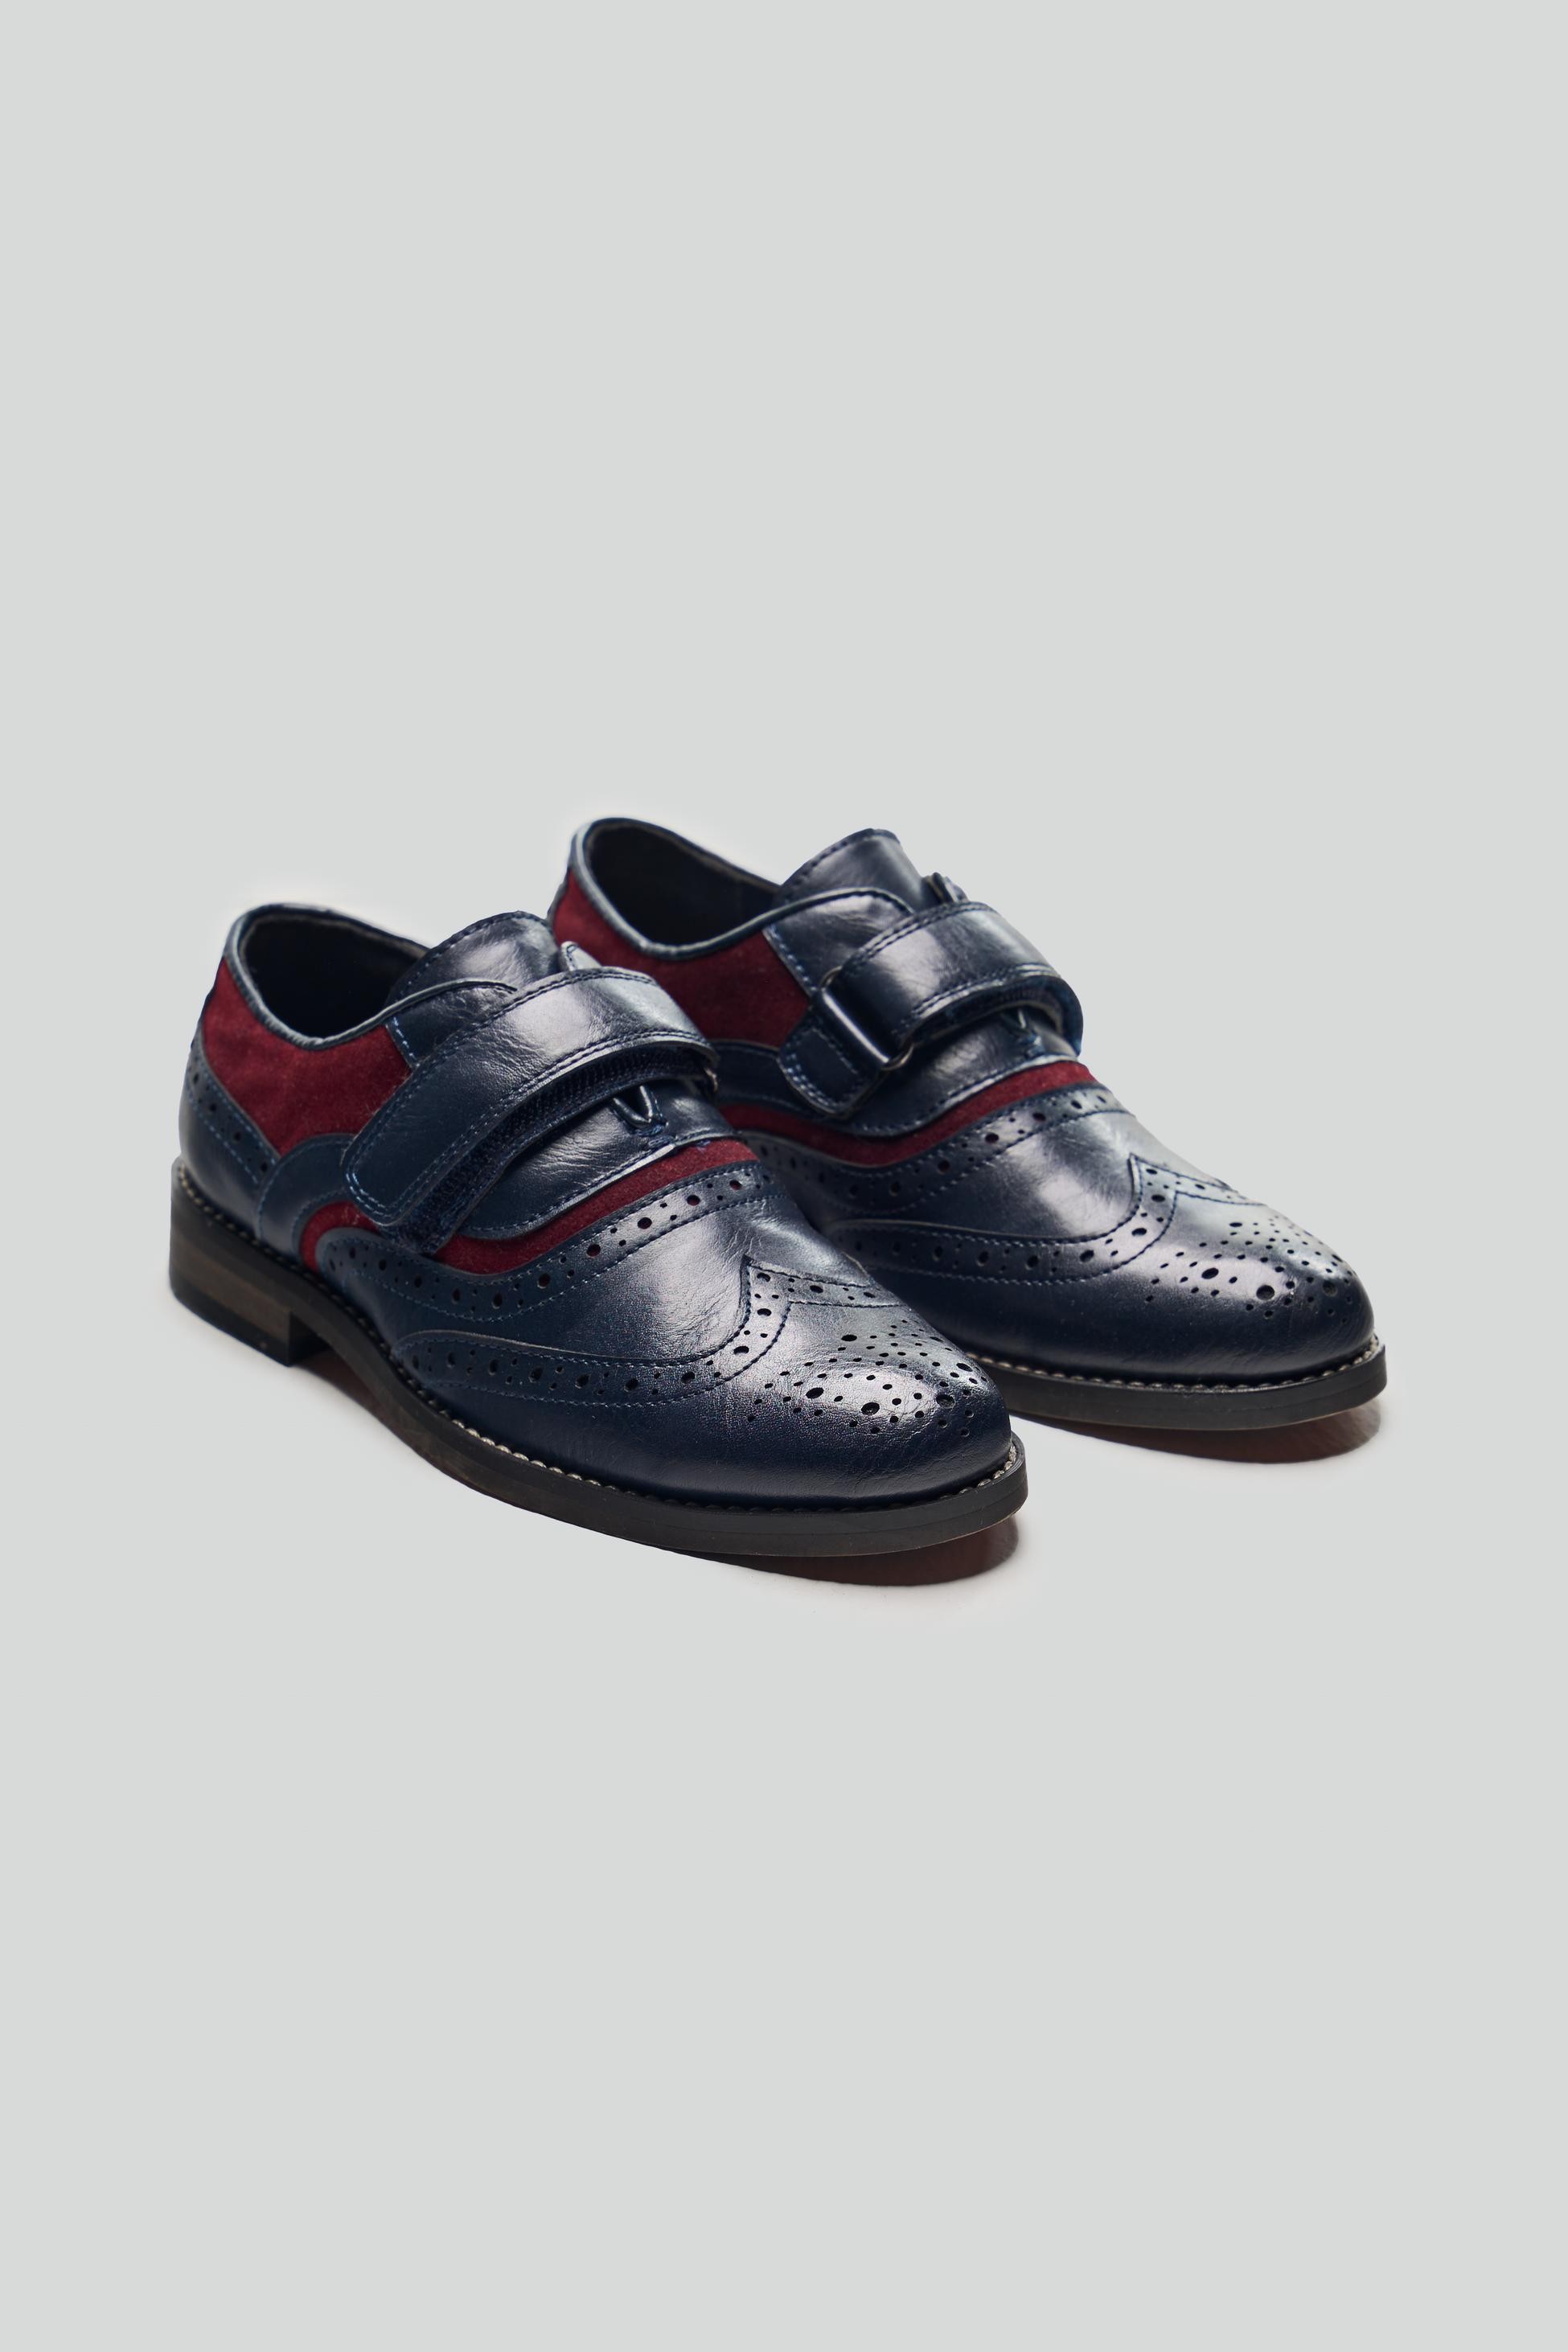 Boys Lace-up Oxford Brogue Dress shoes - RUSSEL - Marineblau - rot